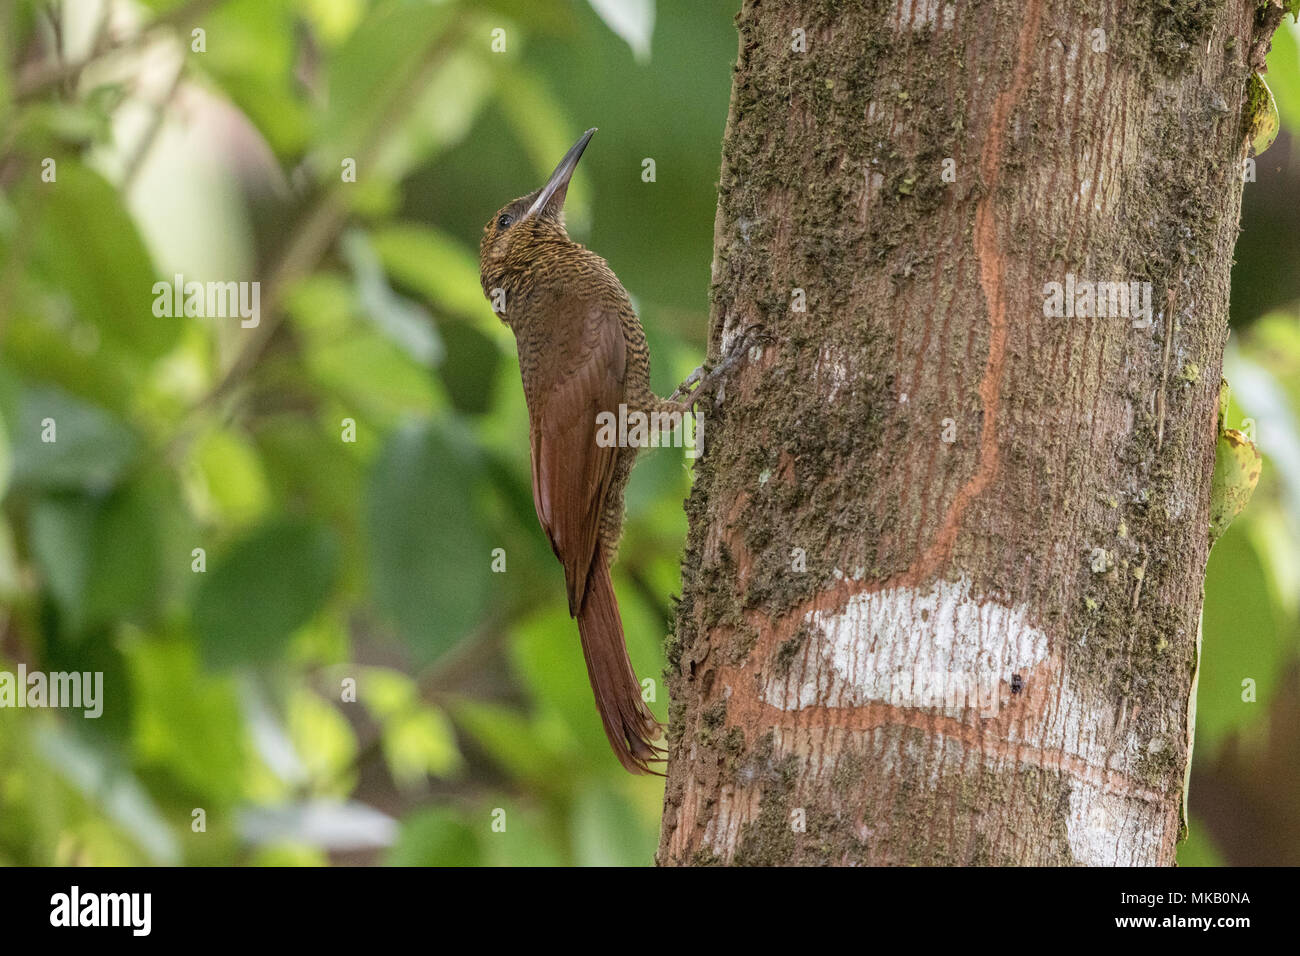 northern barred woodcreeper Dendrocolaptes sanctithomae adult perched on tree trunk, Costa Rica Stock Photo